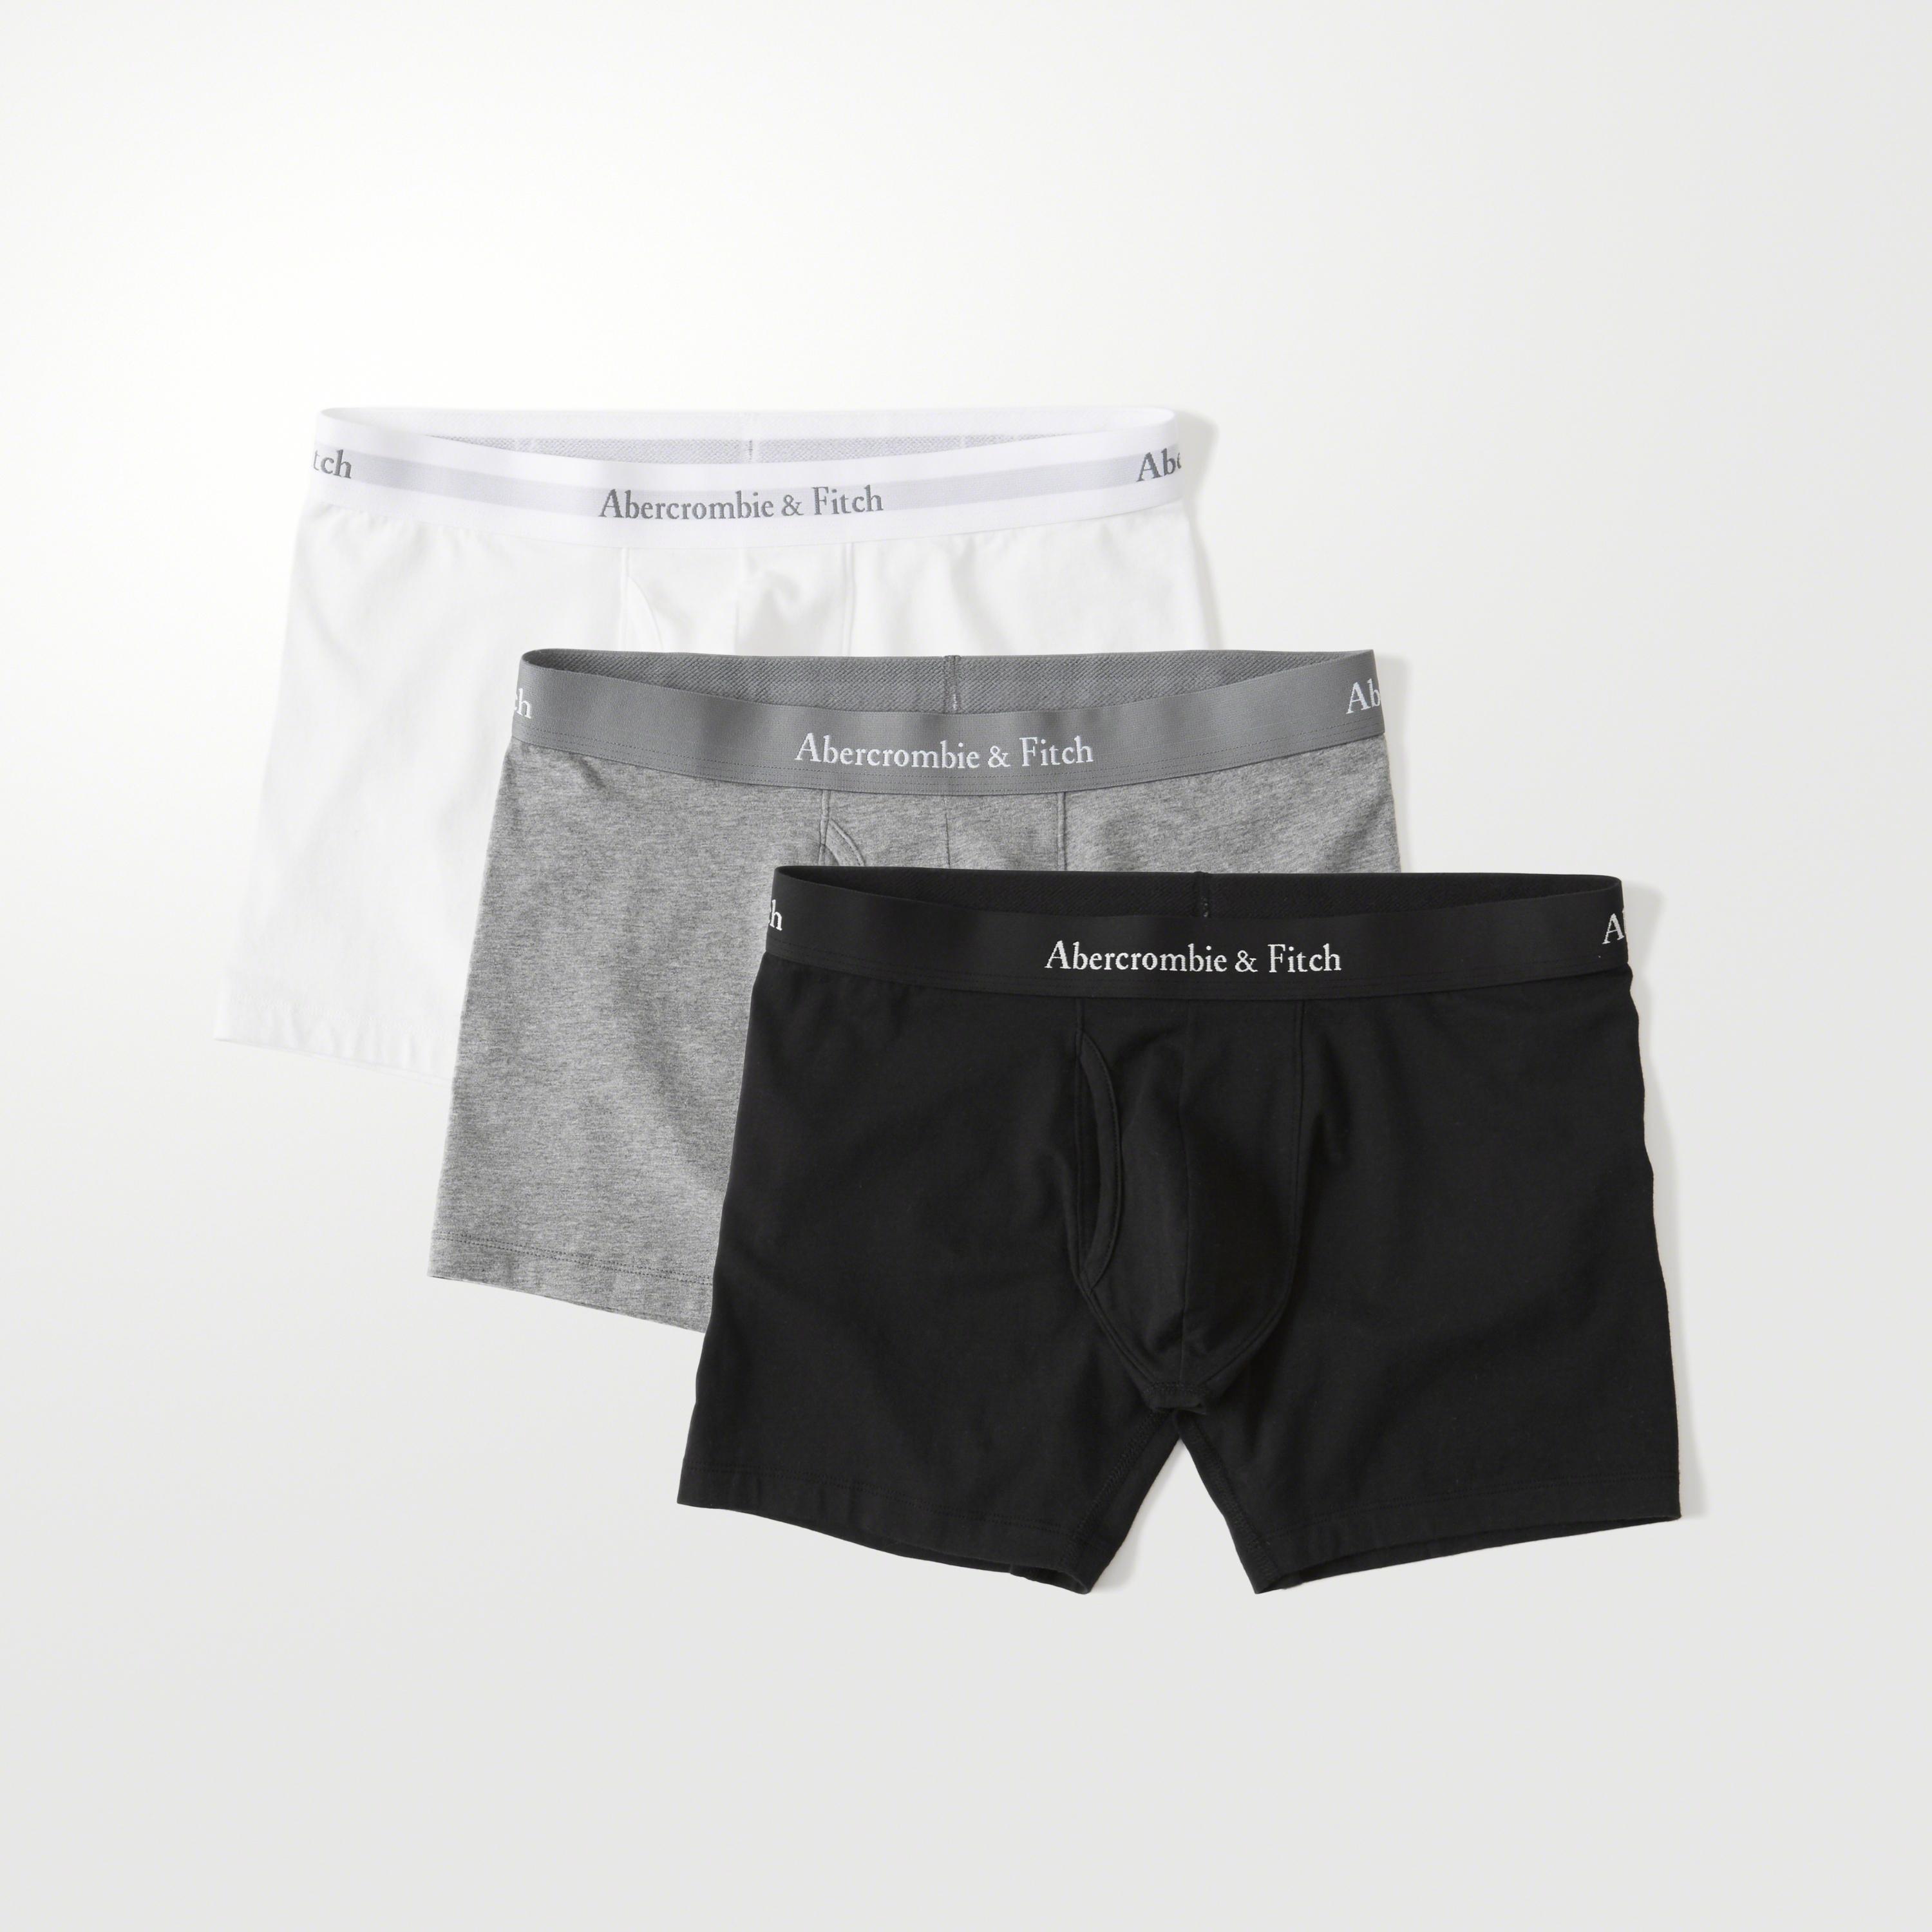 Lyst - Abercrombie & fitch 3-pack Boxer Brief for Men